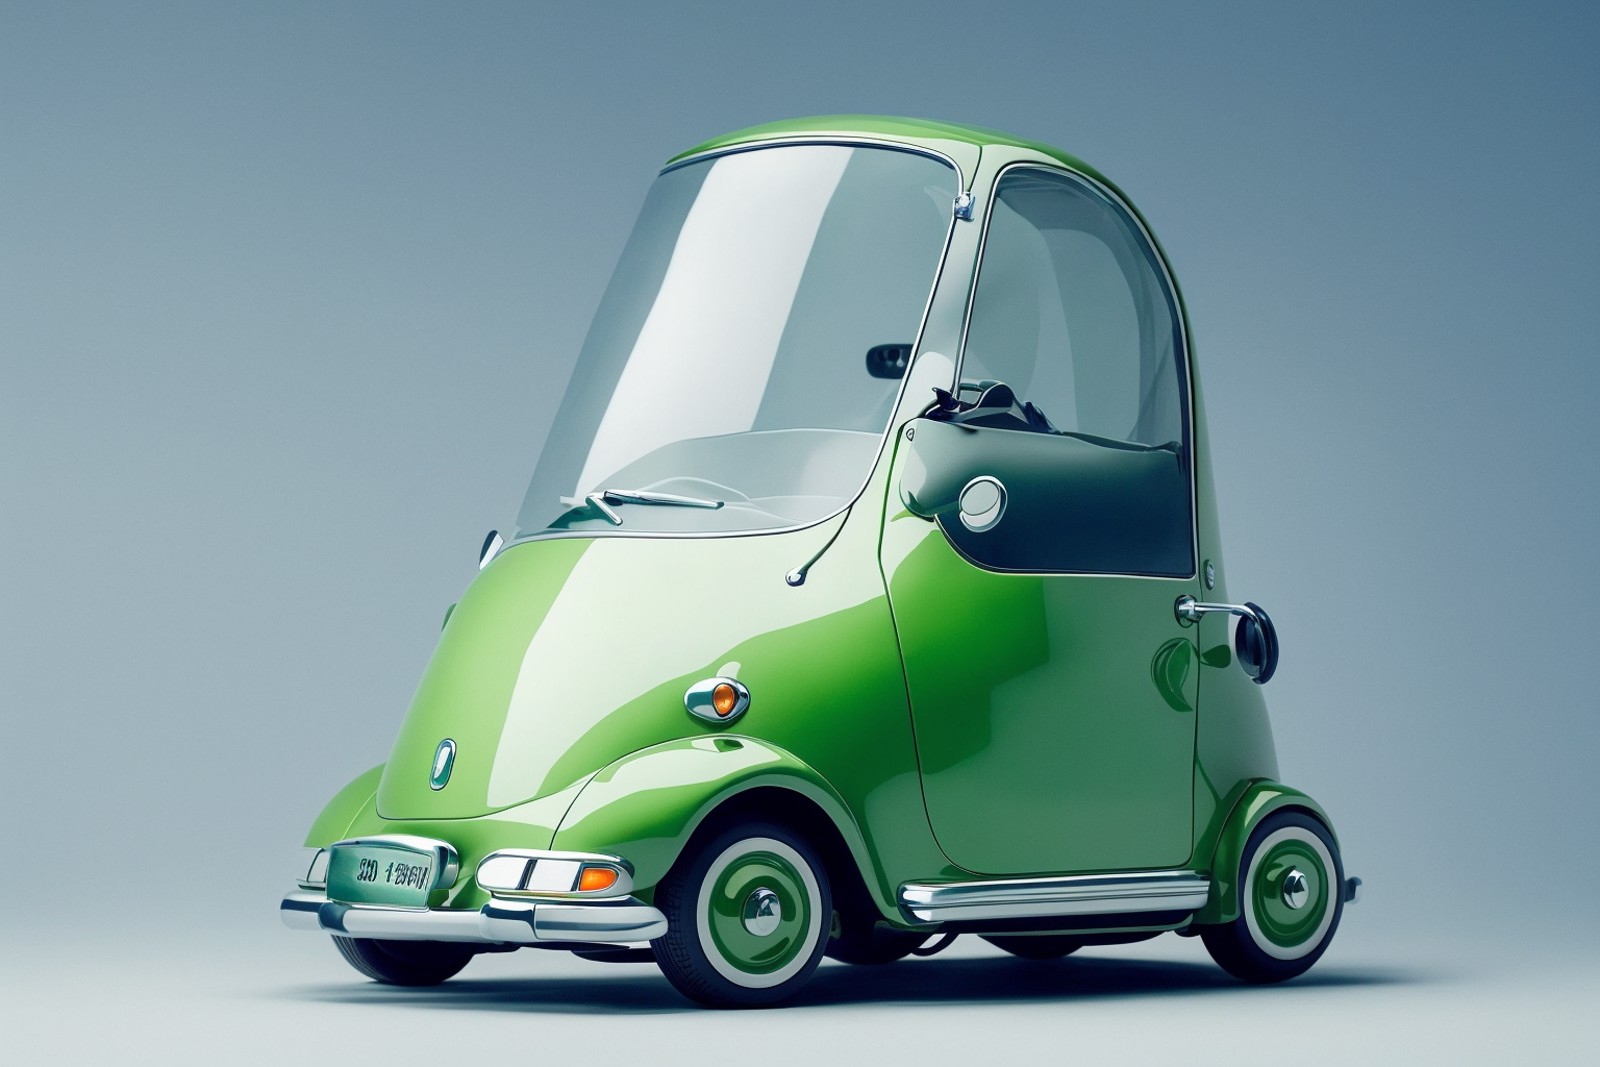 08367-2023483607-((masterpiece, best quality))，A lovely green electric car, flying in the air, on a white background.png